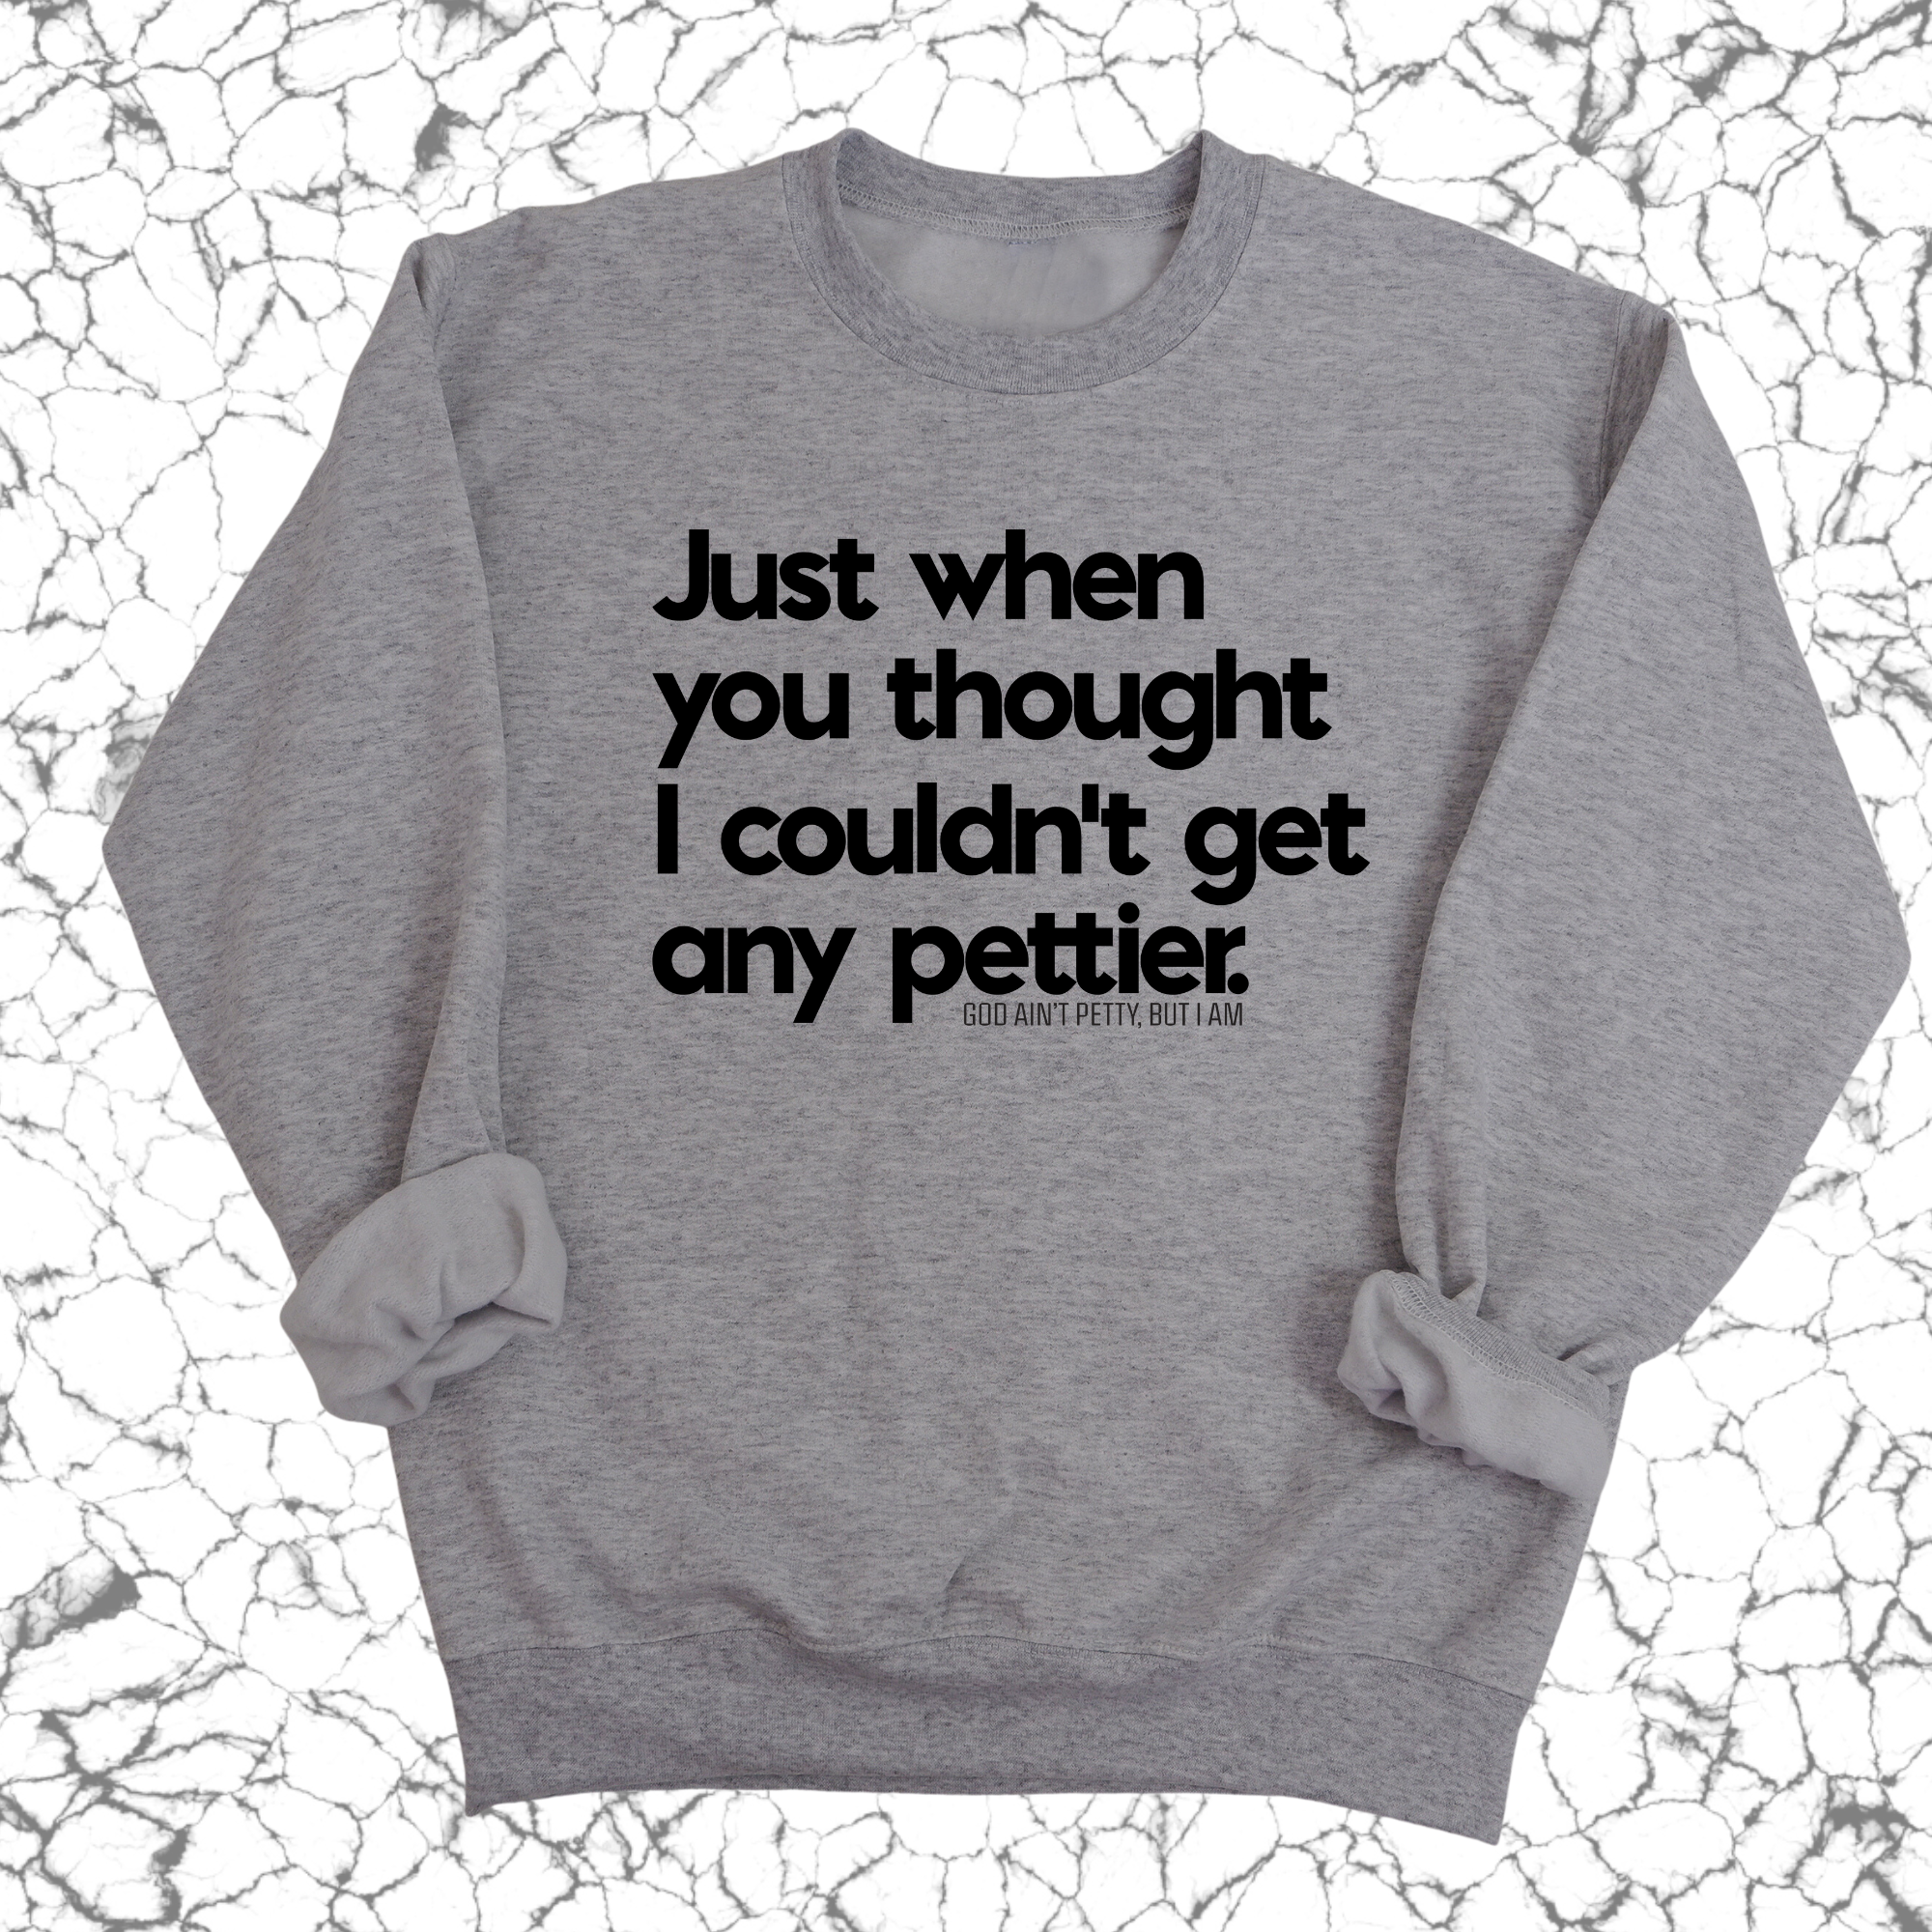 Just when you thought I couldn't get any pettier Unisex Sweatshirt-Sweatshirt-The Original God Ain't Petty But I Am